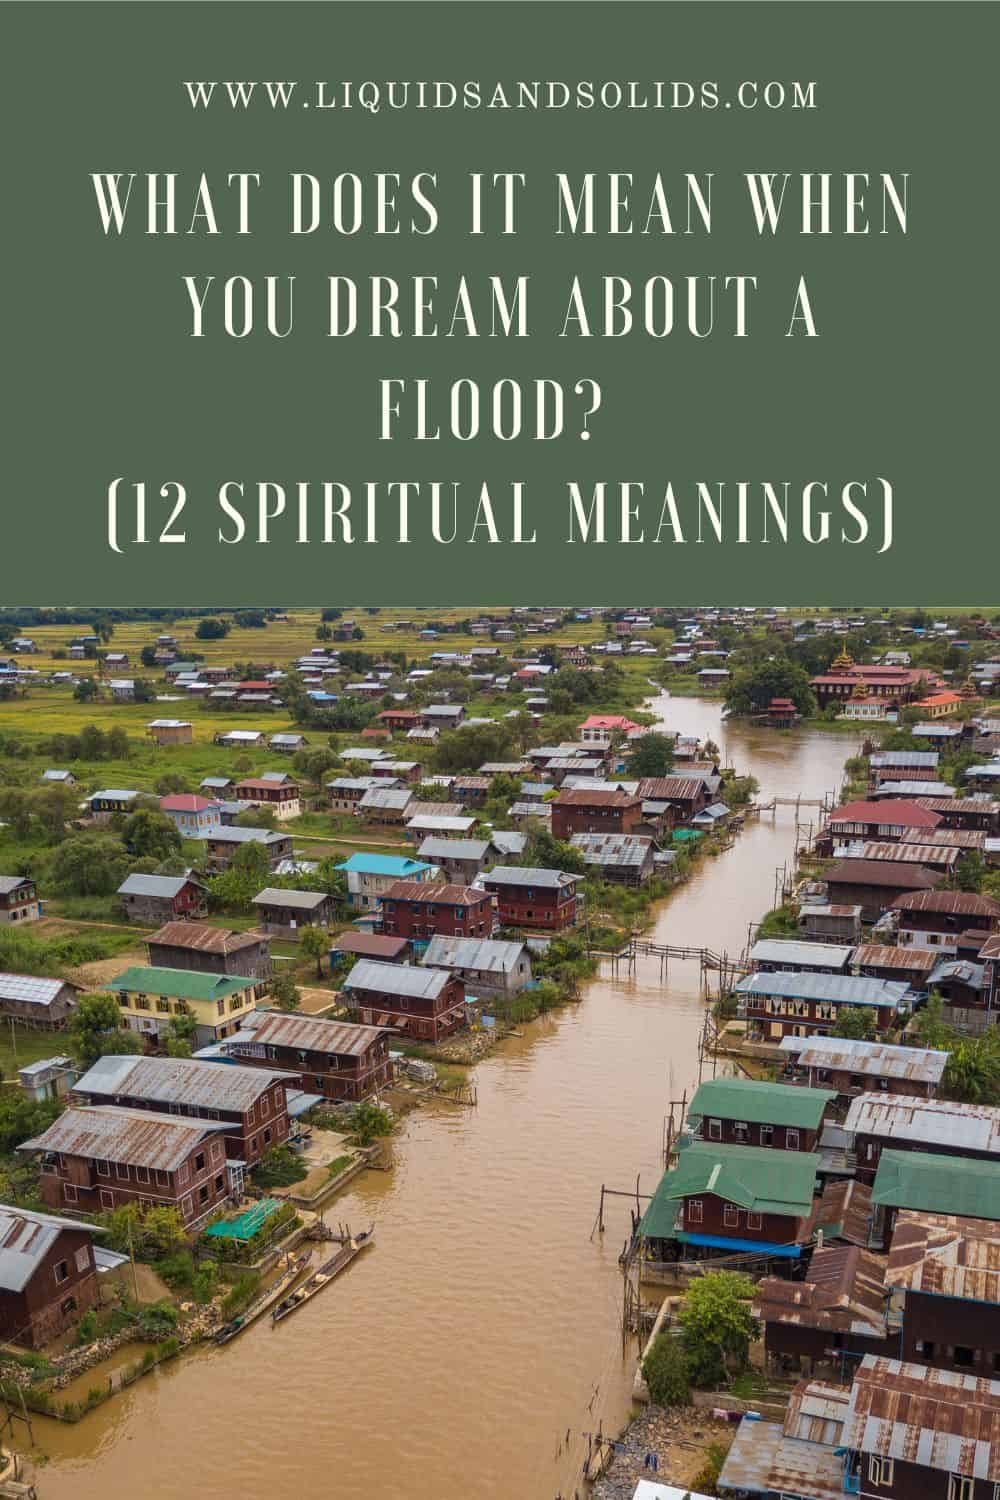 What Does It Mean When You Dream About A Flood? (12 Spiritual Meanings)